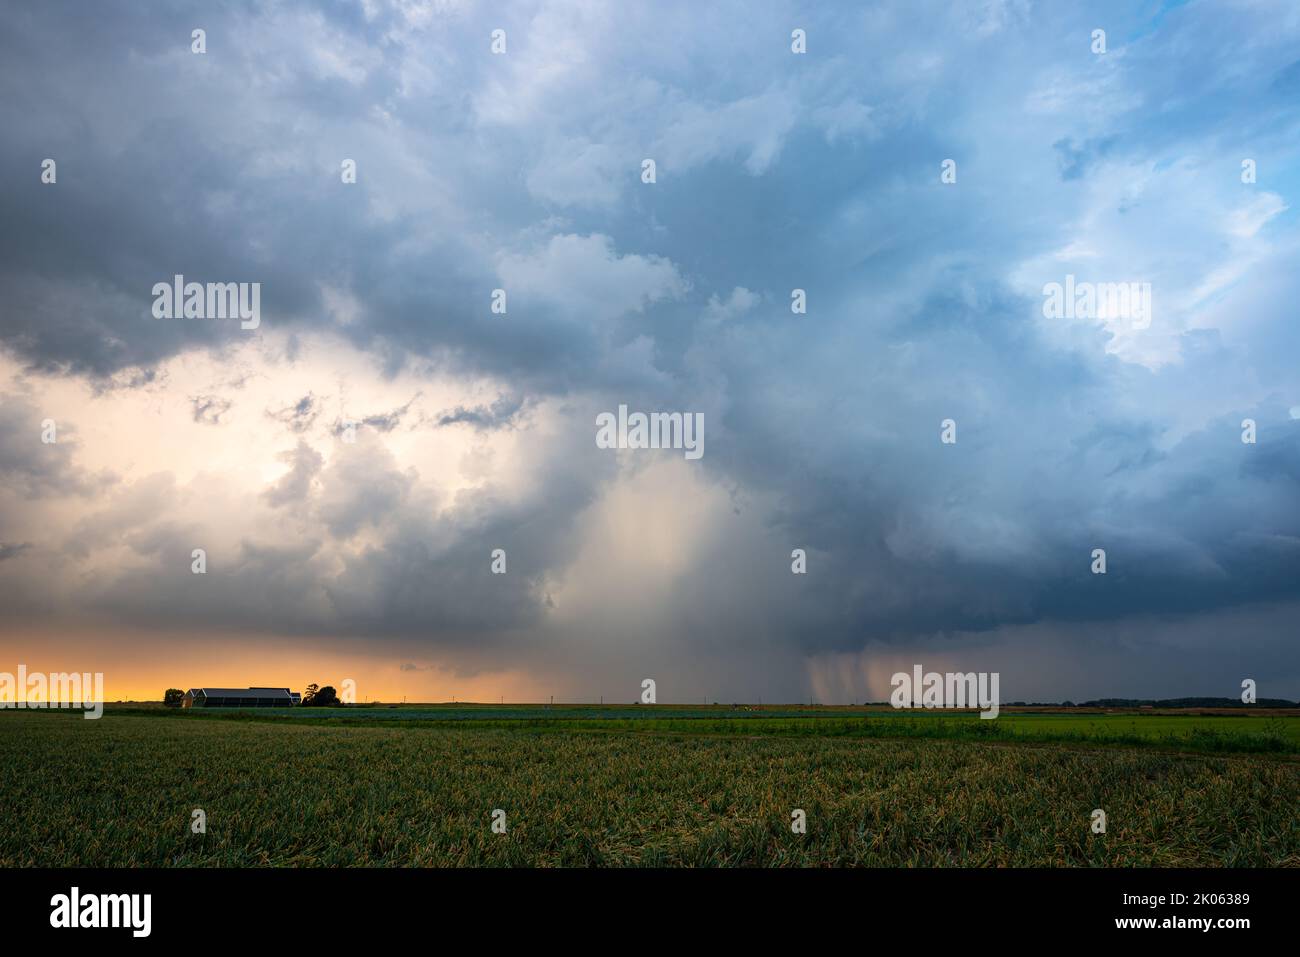 Ominous spectacle as threatening clouds of a thunderstorm pass in the evening light Stock Photo